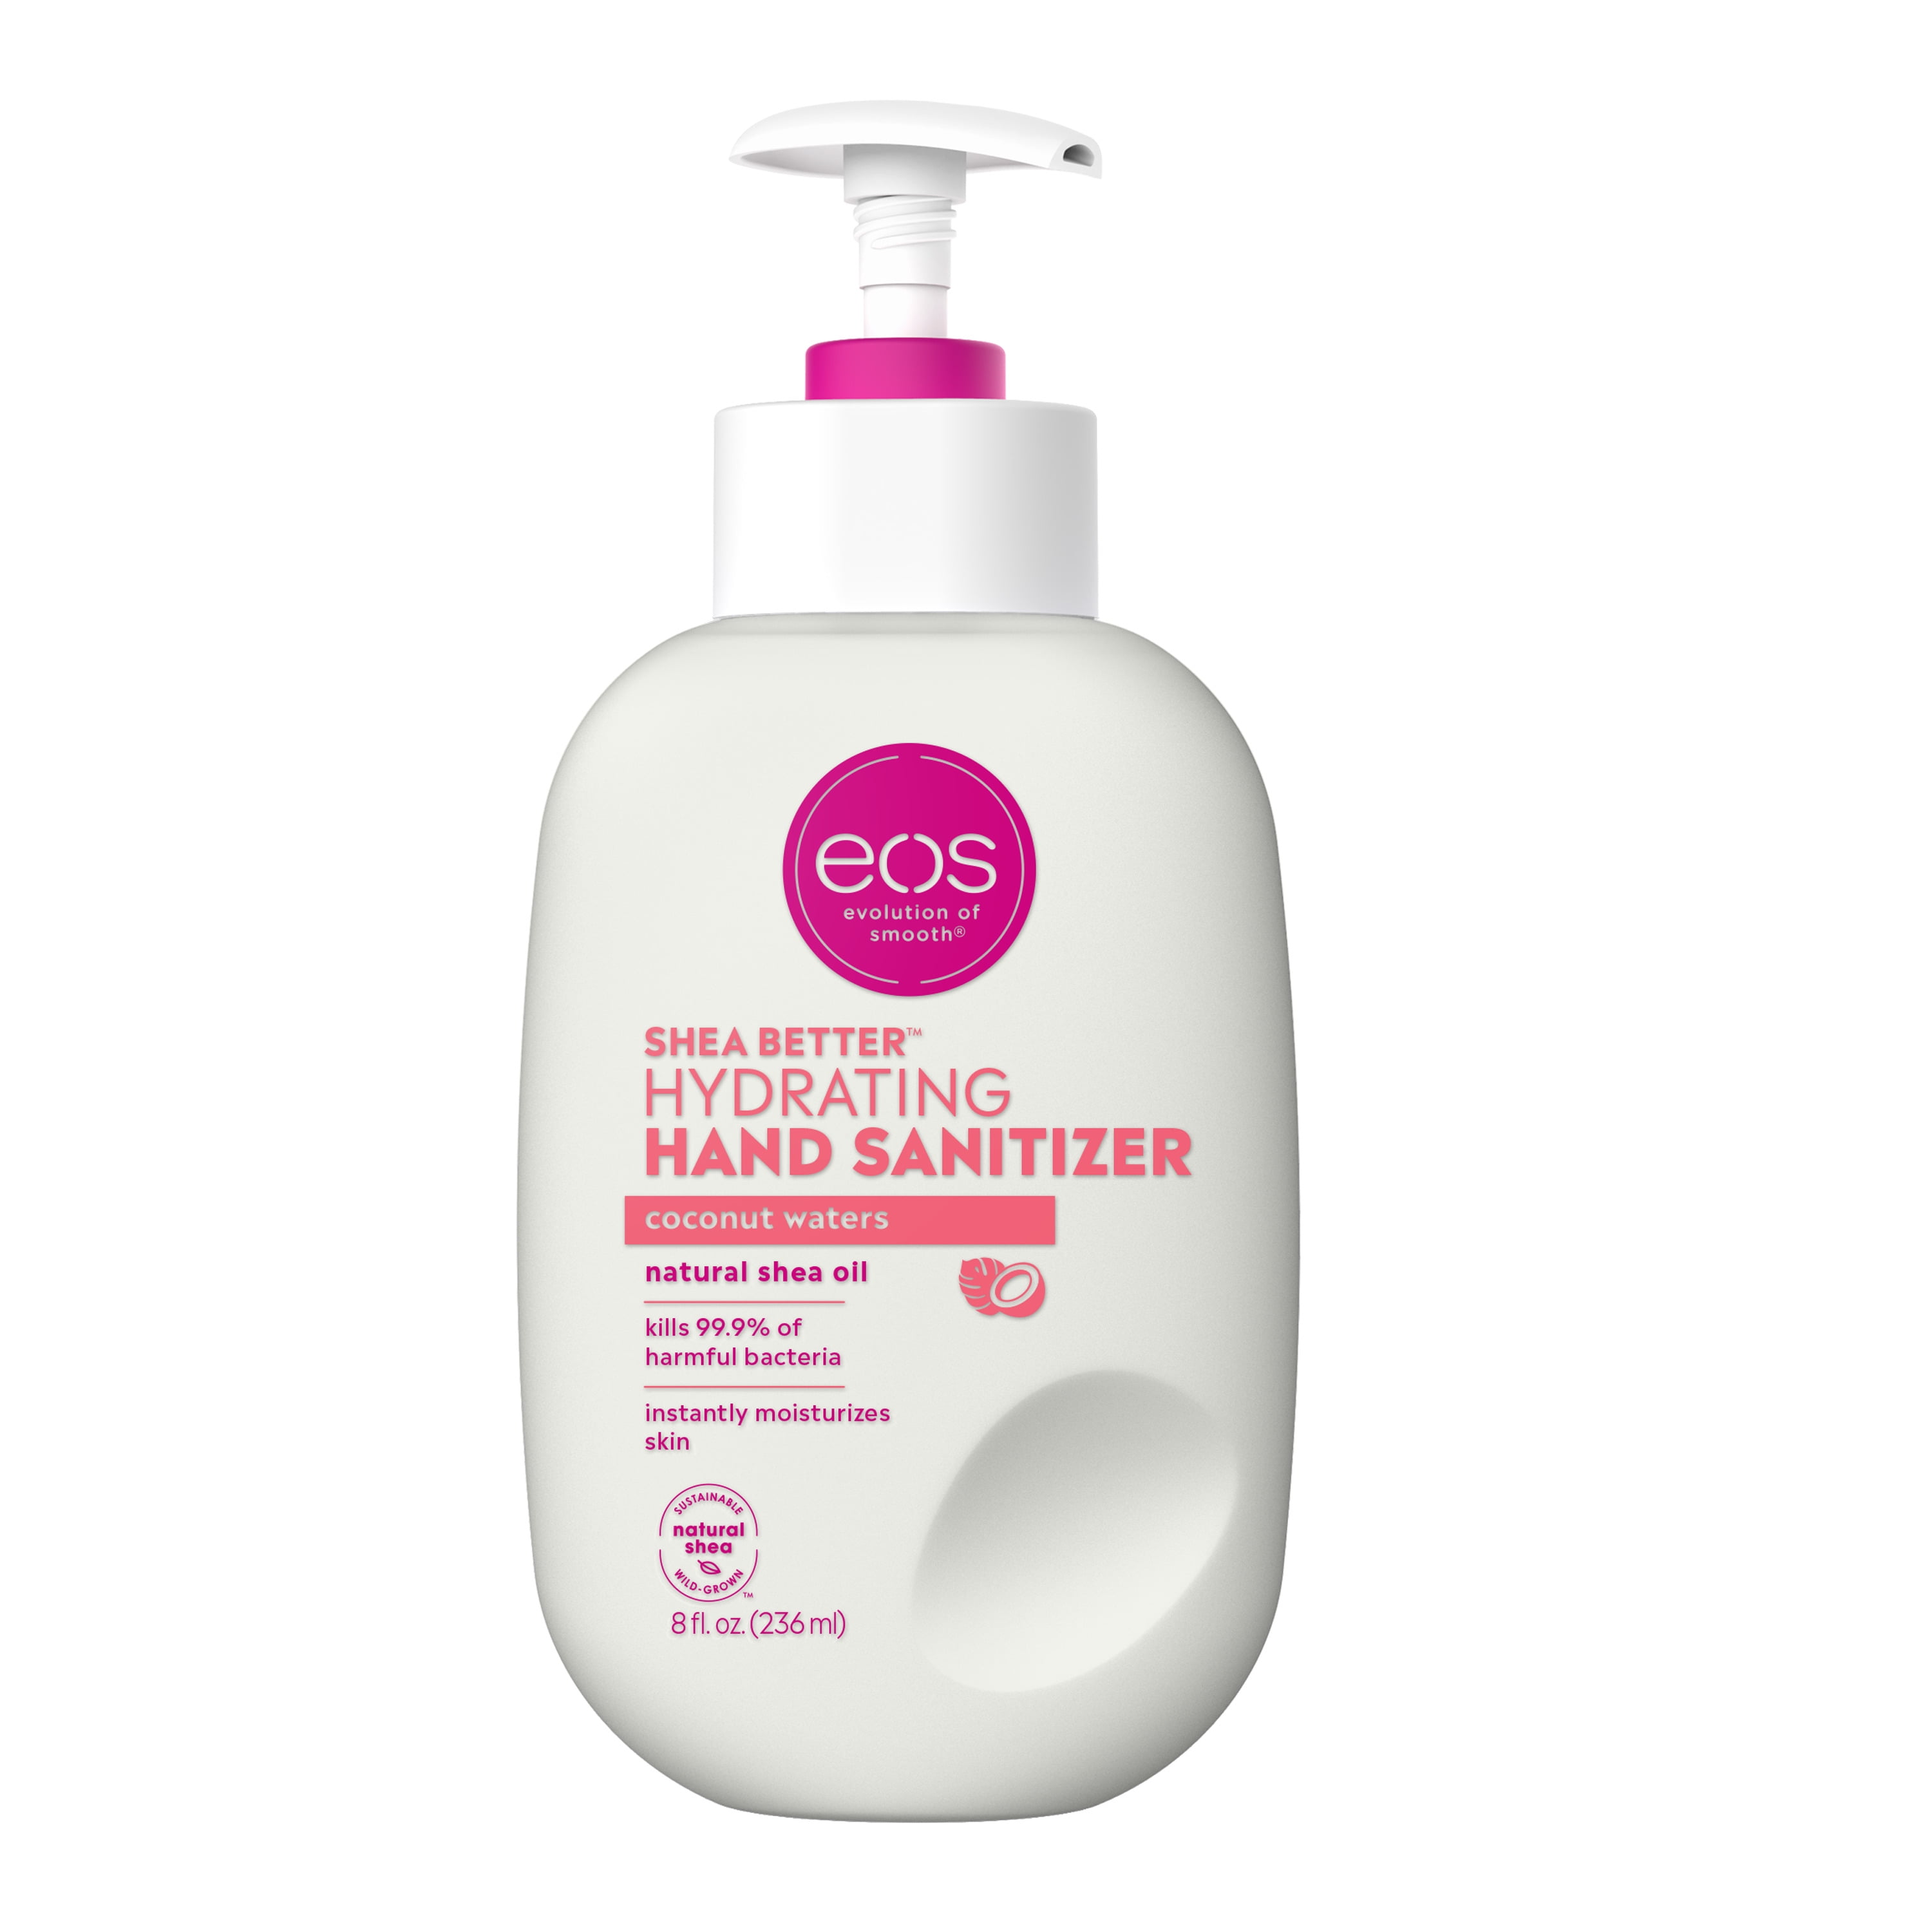 eos Shea Better Hydrating Hand Sanitizer - Coconut Waters | 8 fl oz